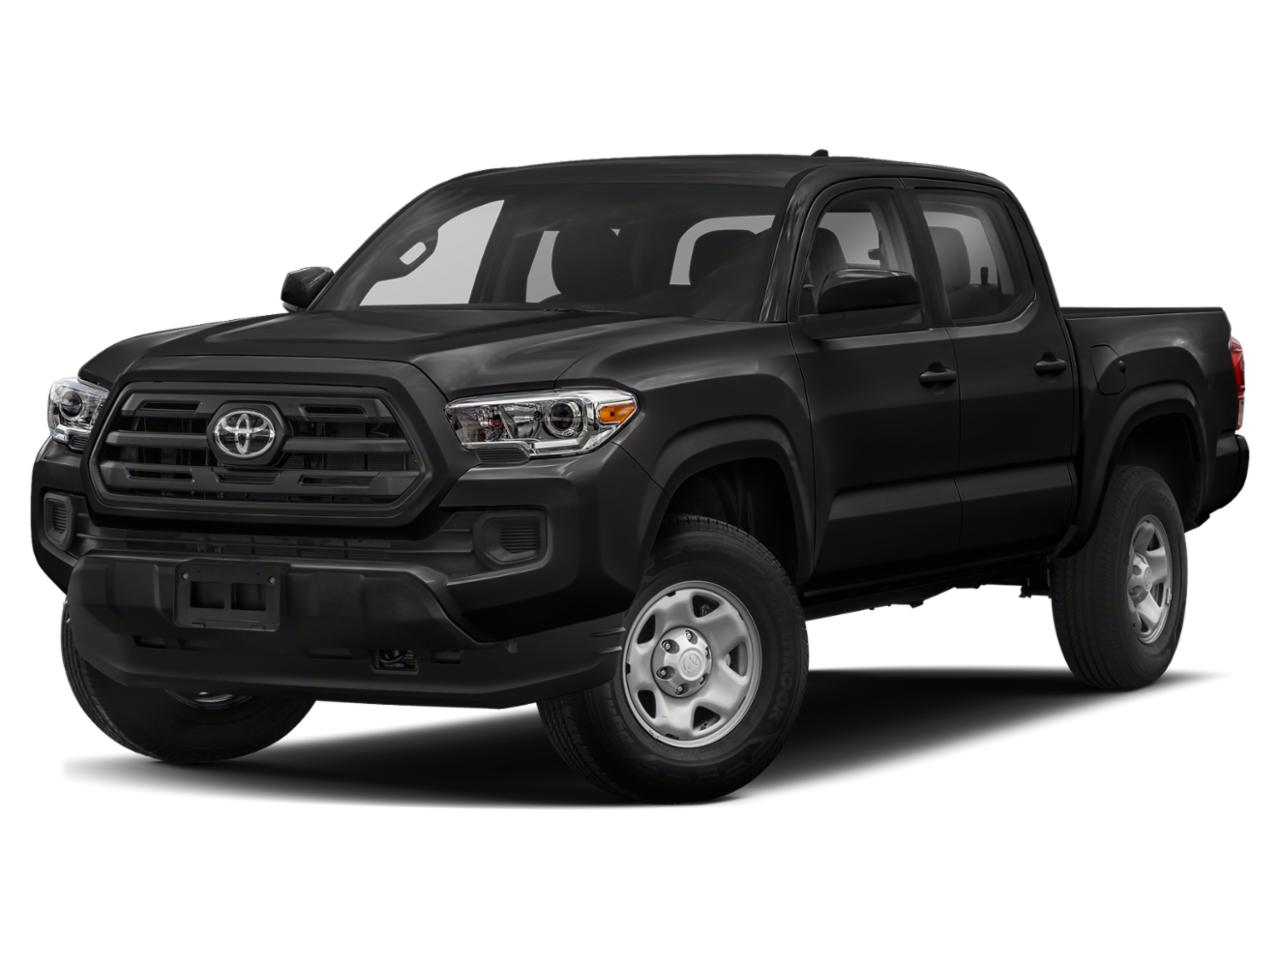 2019 Toyota Tacoma 4WD Vehicle Photo in WEST VALLEY CITY, UT 84120-3202